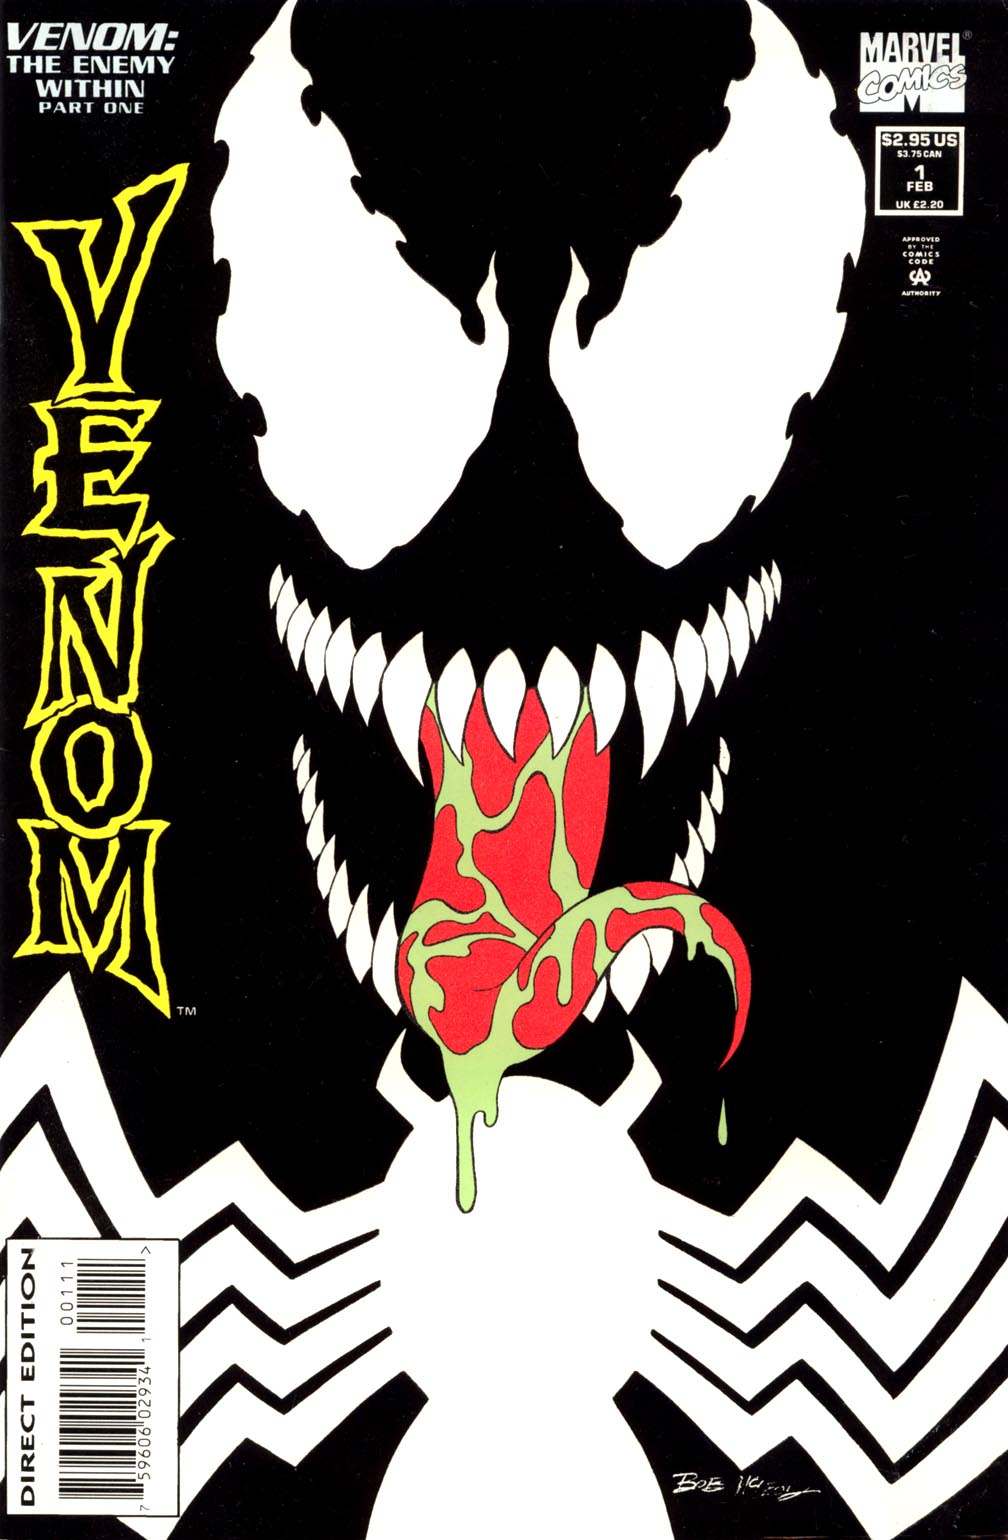 Read online Venom: The Enemy Within comic -  Issue #1 - 2